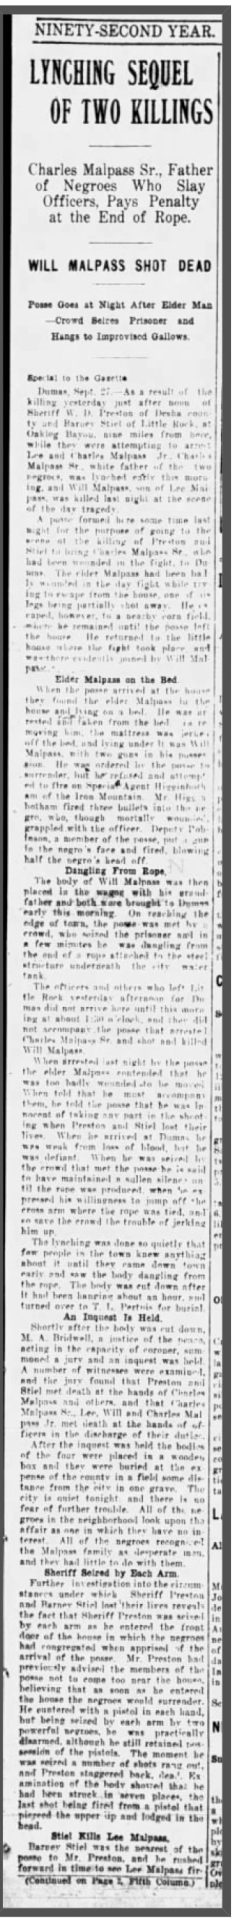 "Lynching sequel of two killings" newspaper clipping